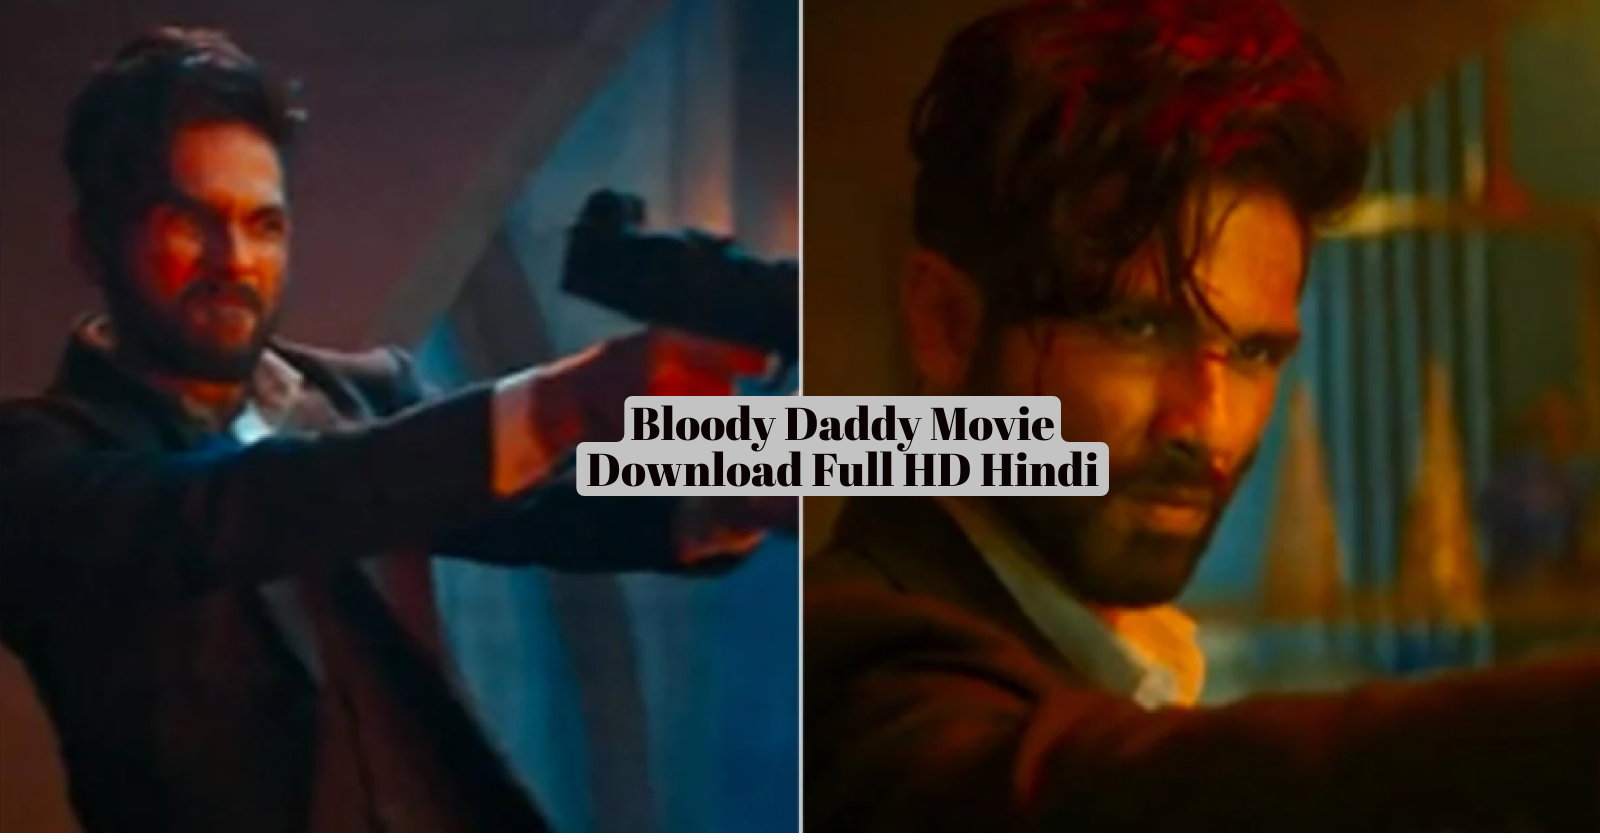 Bloody Daddy Movie Download Full HD Hindi